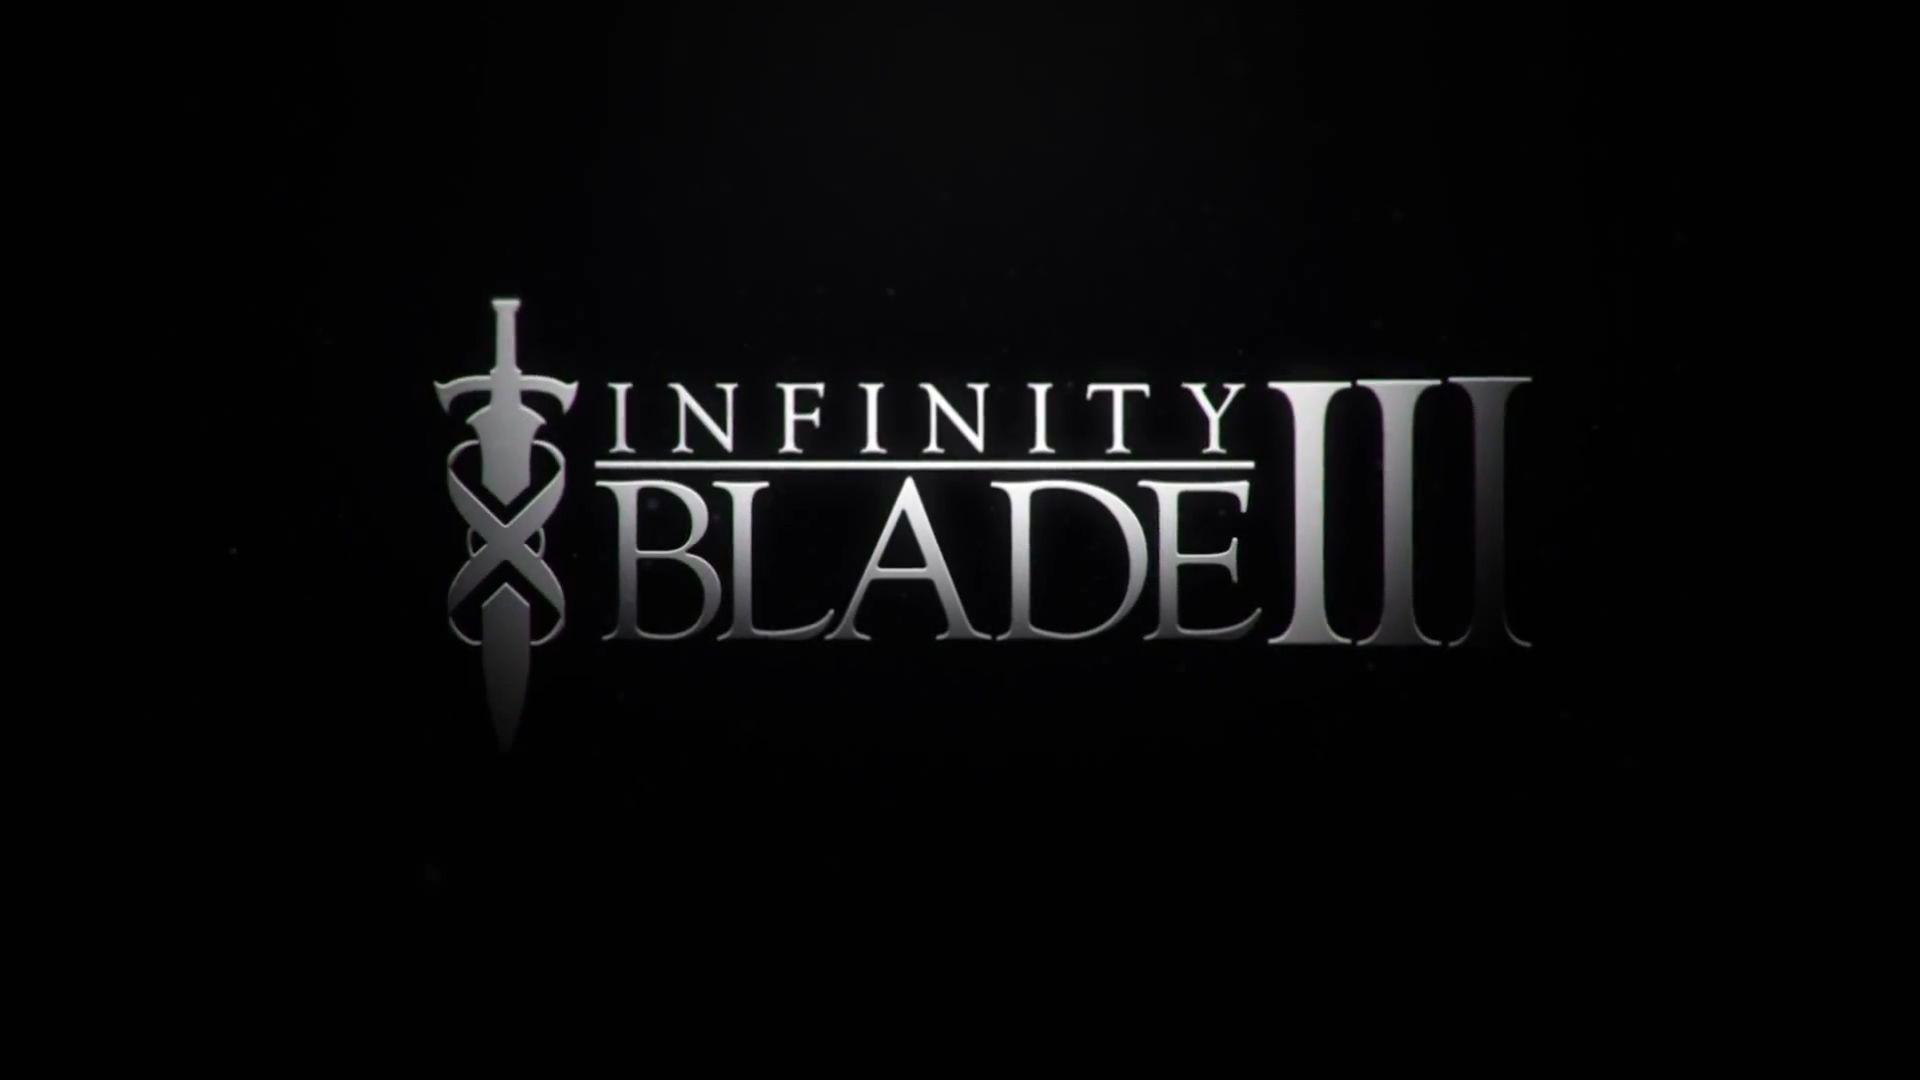 Infinity Blade III officially announced, hitting App Store next week